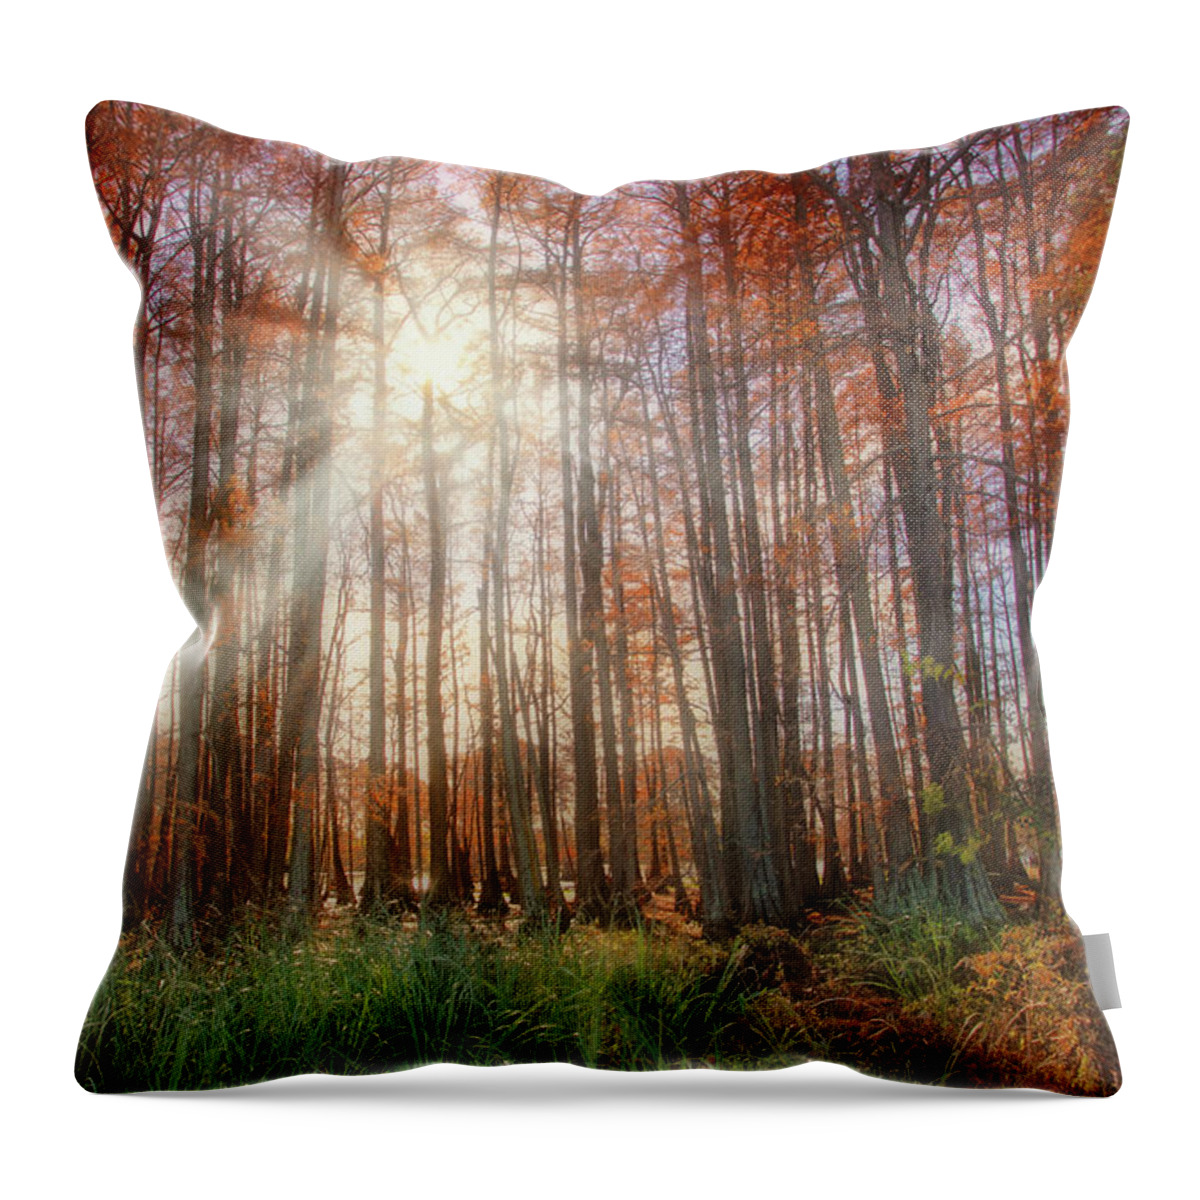 Autumn Throw Pillow featuring the photograph Autumn Cypress - Fall - Trees by Jason Politte